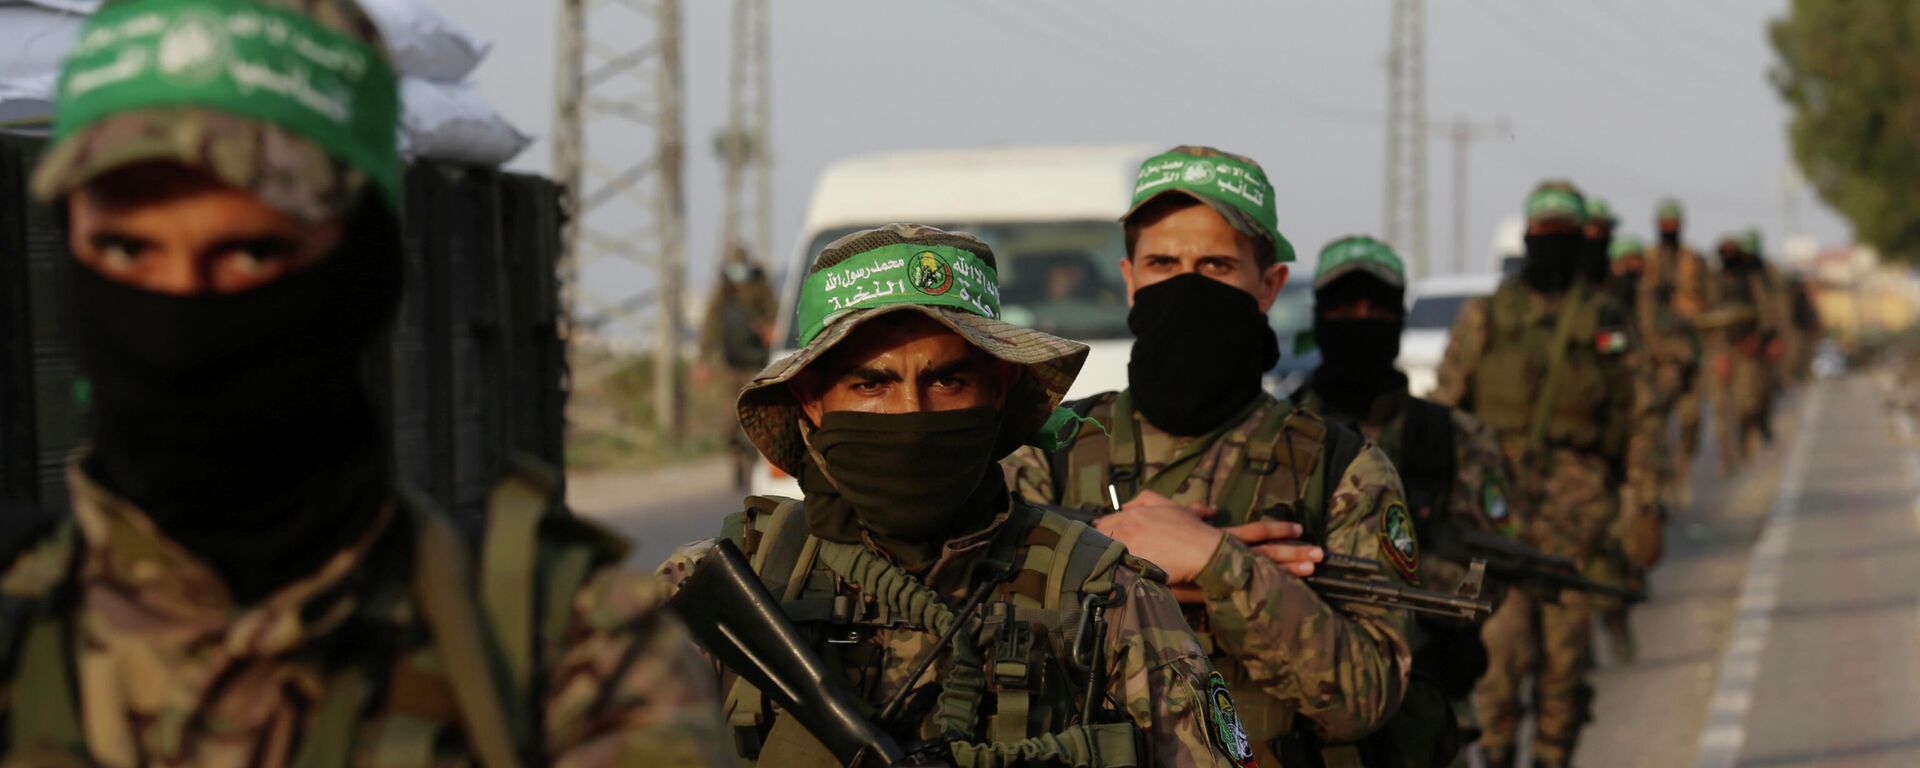 Masked militants from the Izzedine al-Qassam Brigades, a military wing of Hamas, march with their rifles along the main road of the Nusseirat refugee camp, central Gaza Strip, Thursday, 28 October 2021. - Sputnik International, 1920, 04.07.2022